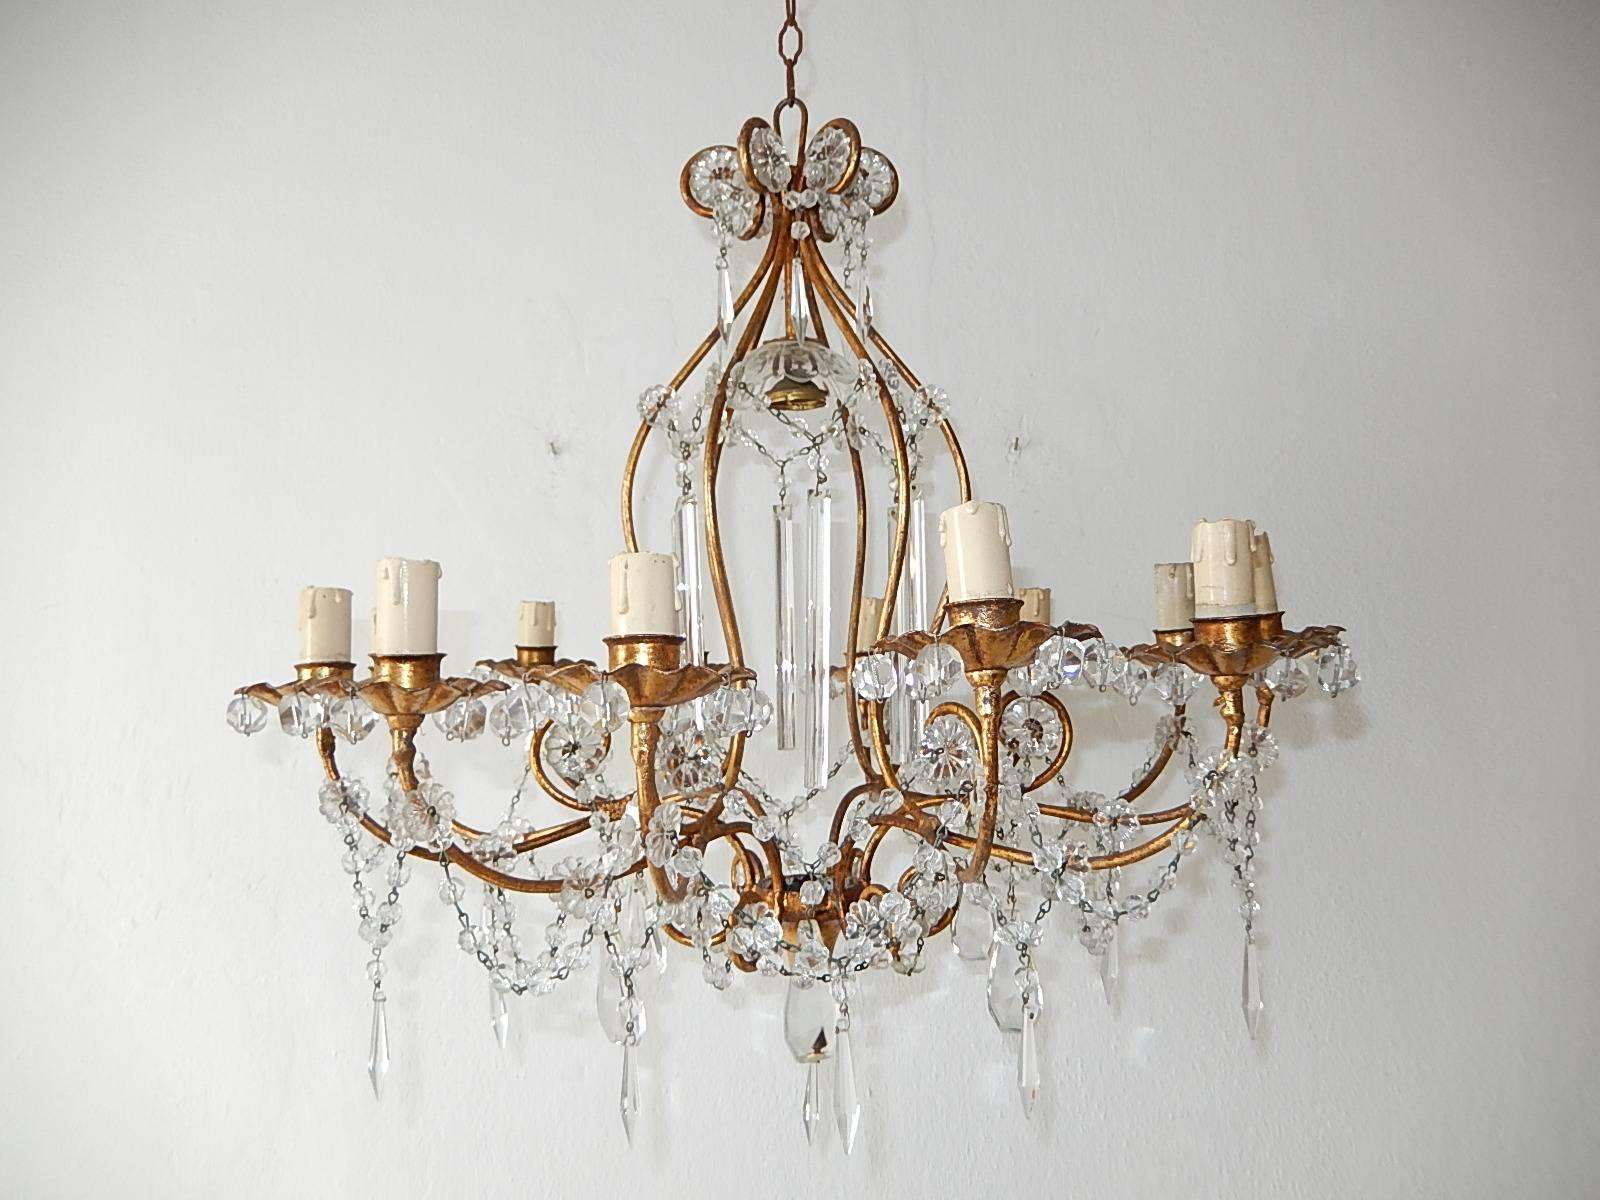 Housing 13 lights. 12 encircling and one under a crystal bobeches. Rewired and ready to hang. Gilt metal with florets, swags of crystal beads and rare crystal prisms. Free priority shipping from Italy.